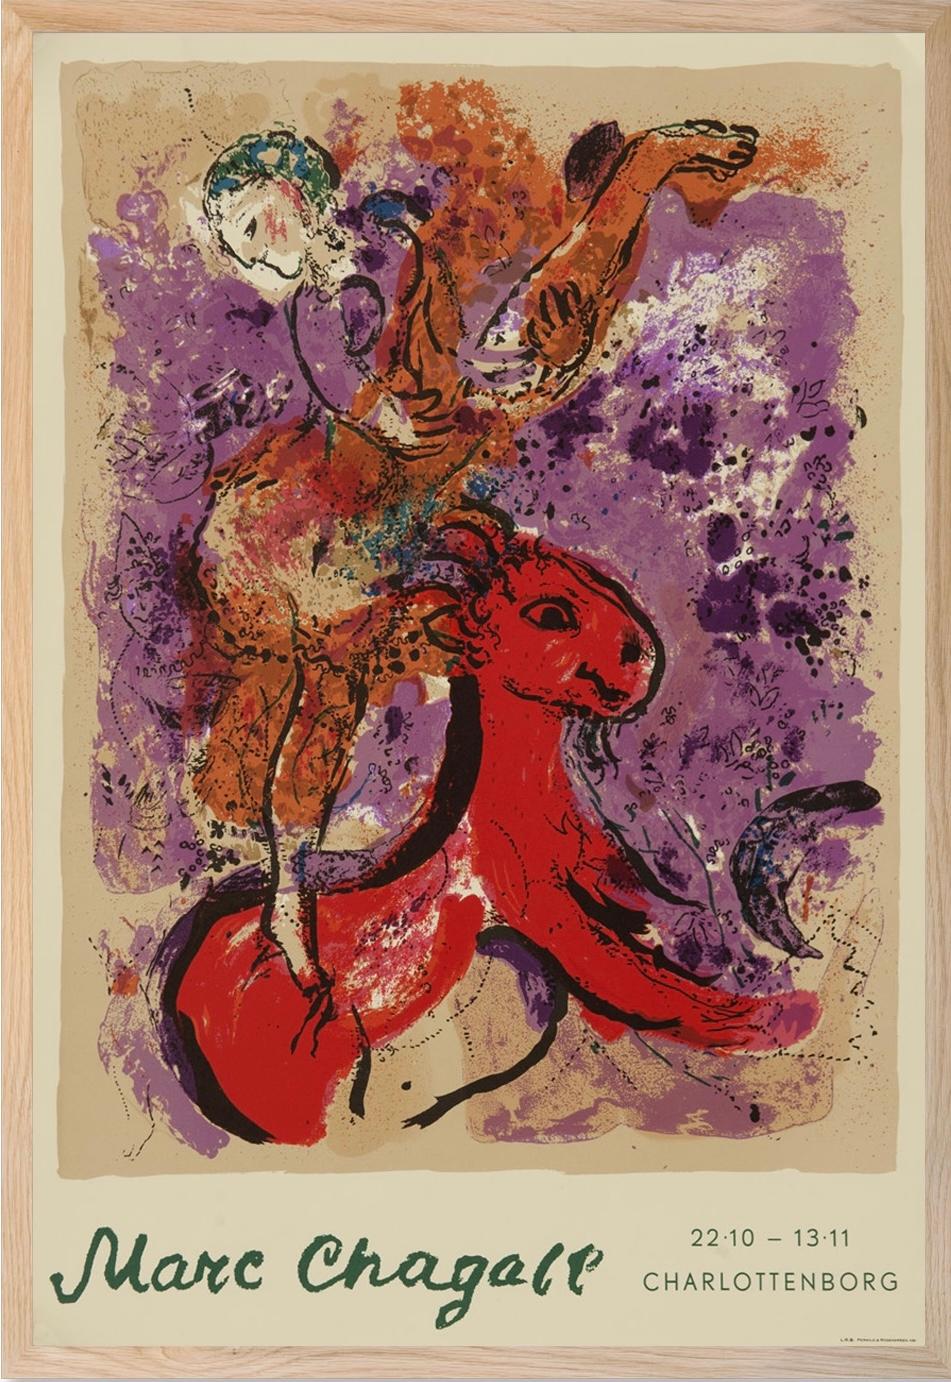 Woman Circus Rider on Red Horse - superb Chagall poster